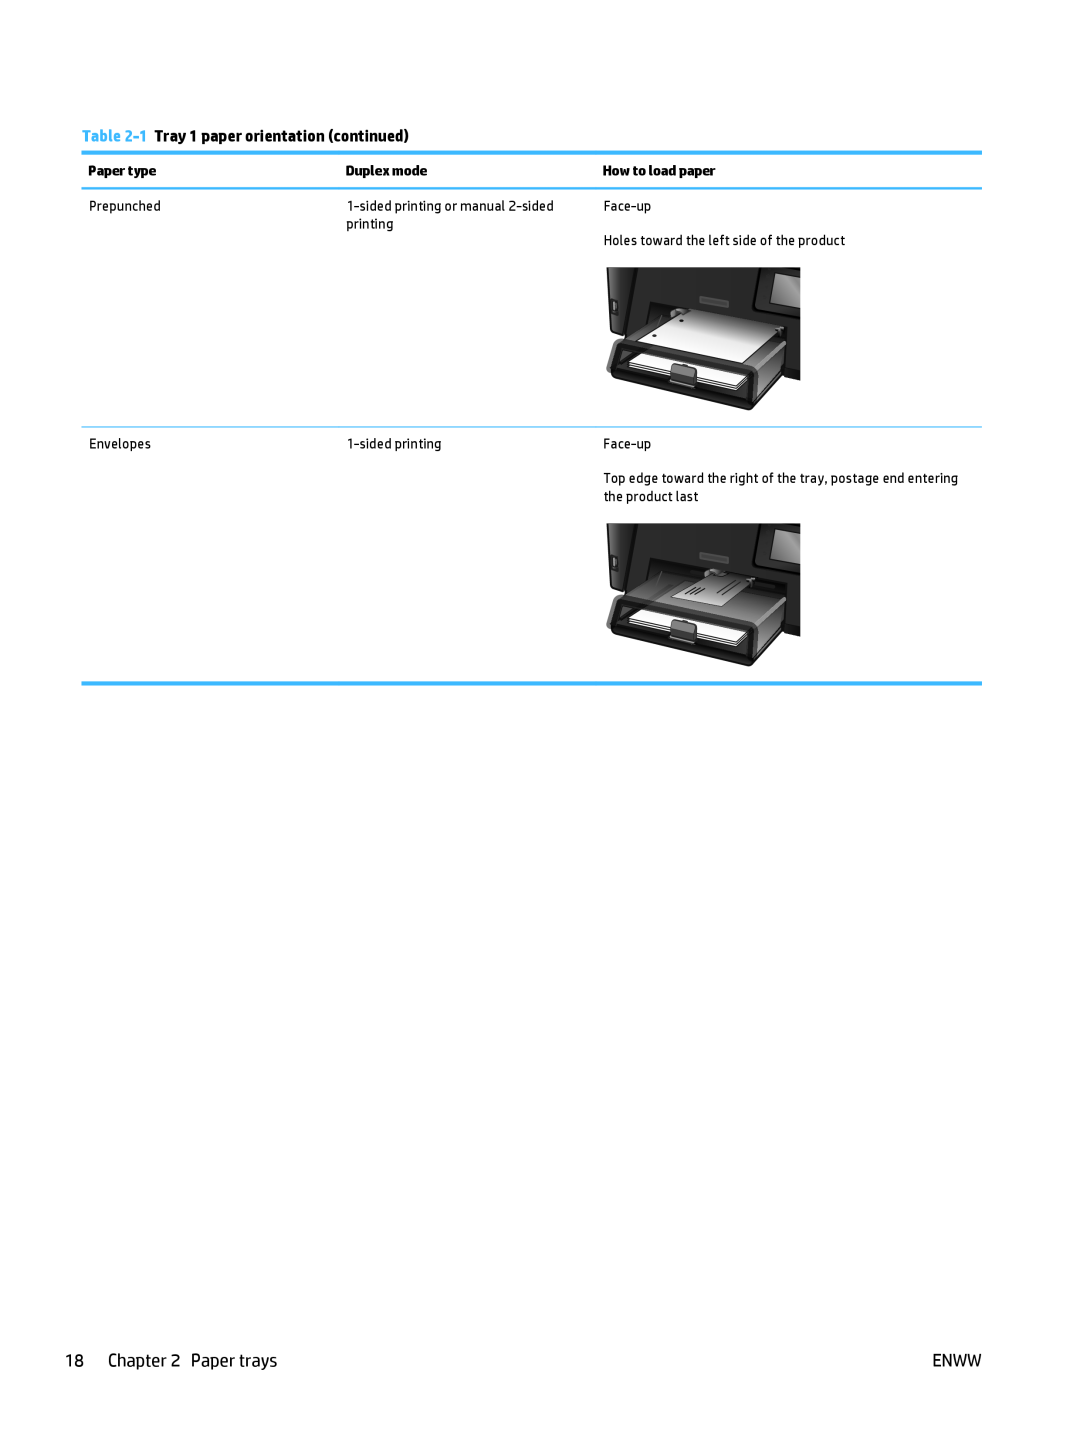 HP MFP M225dn, MFP M225dw manual Paper trays, 1 Tray 1 paper orientation continued 